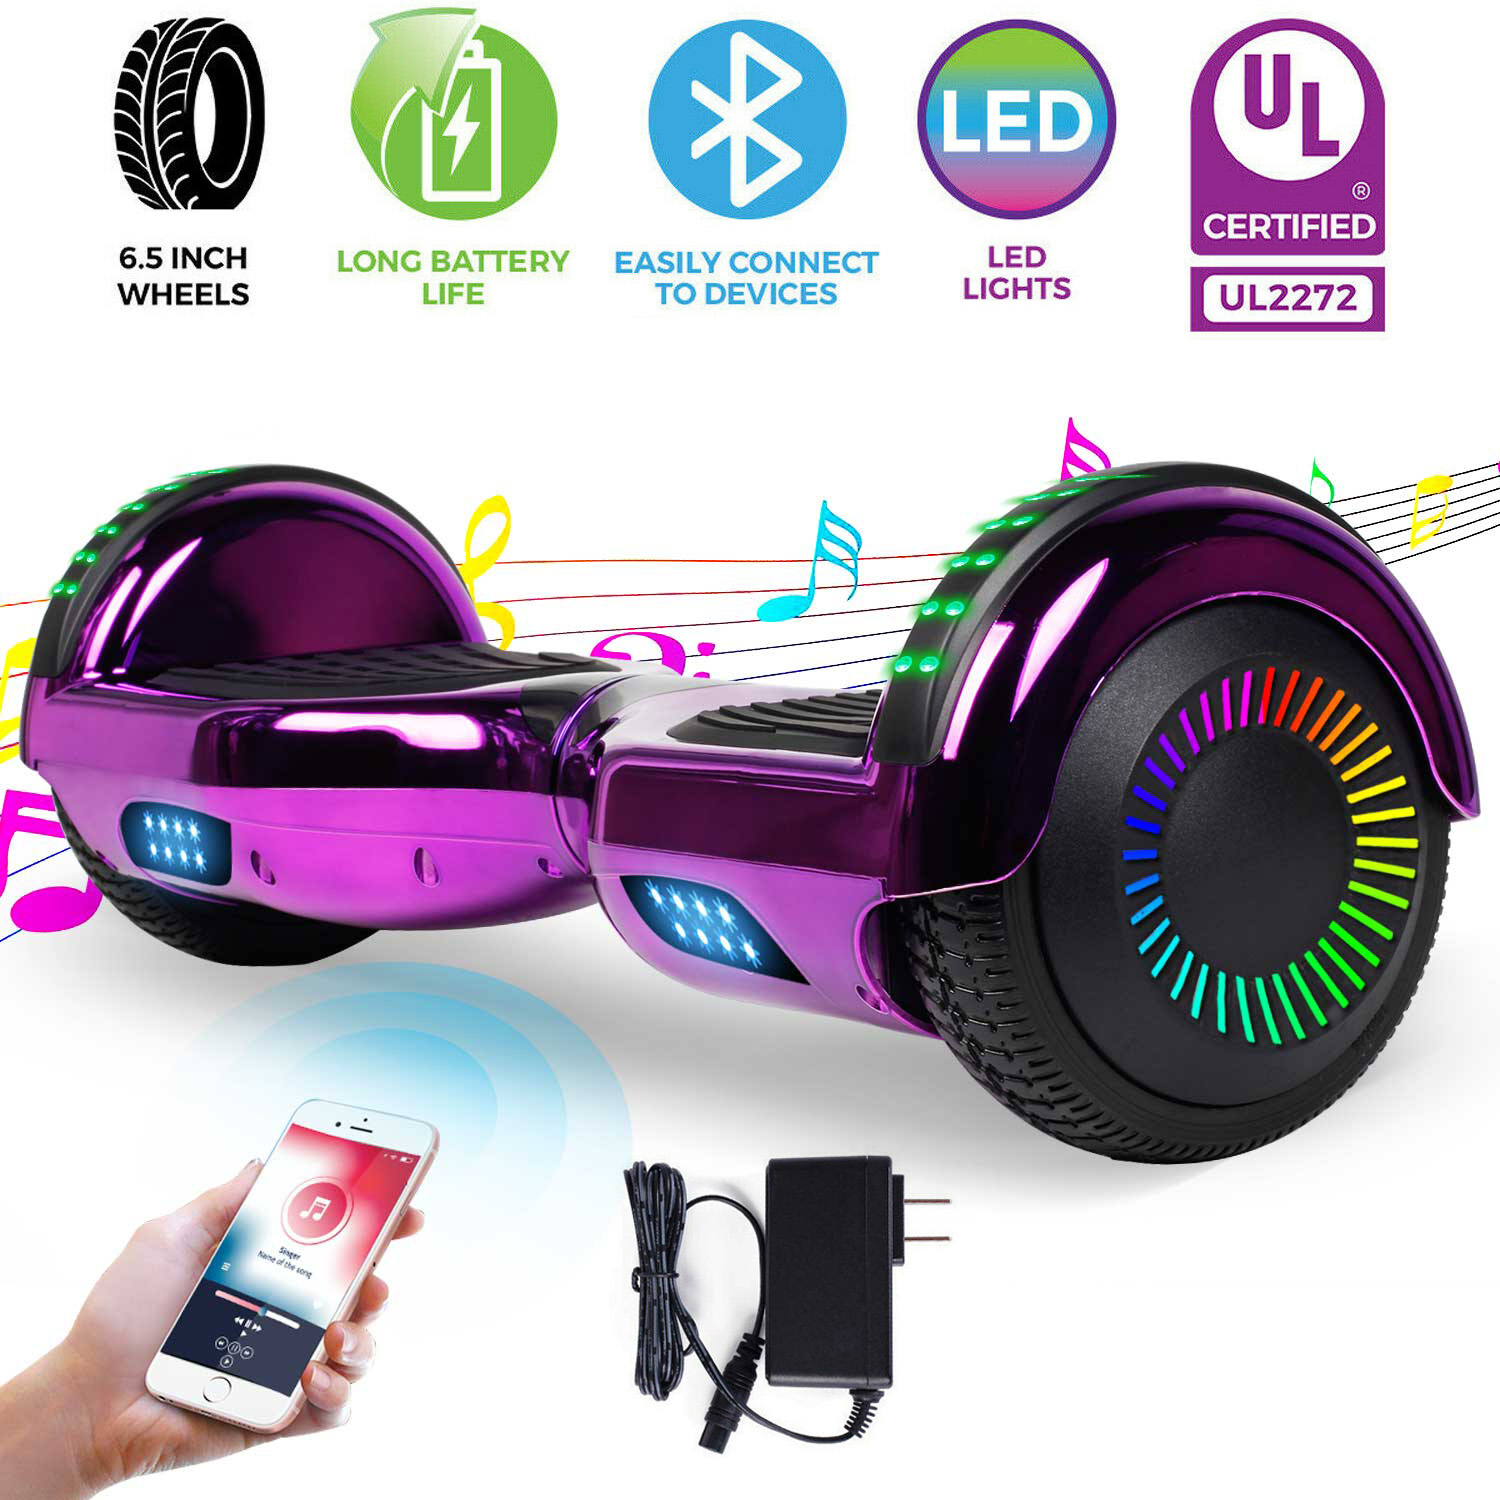 6.5/" LED Hoverboard Electric Self Balancing Bluetooth Scooter No Bag Purple